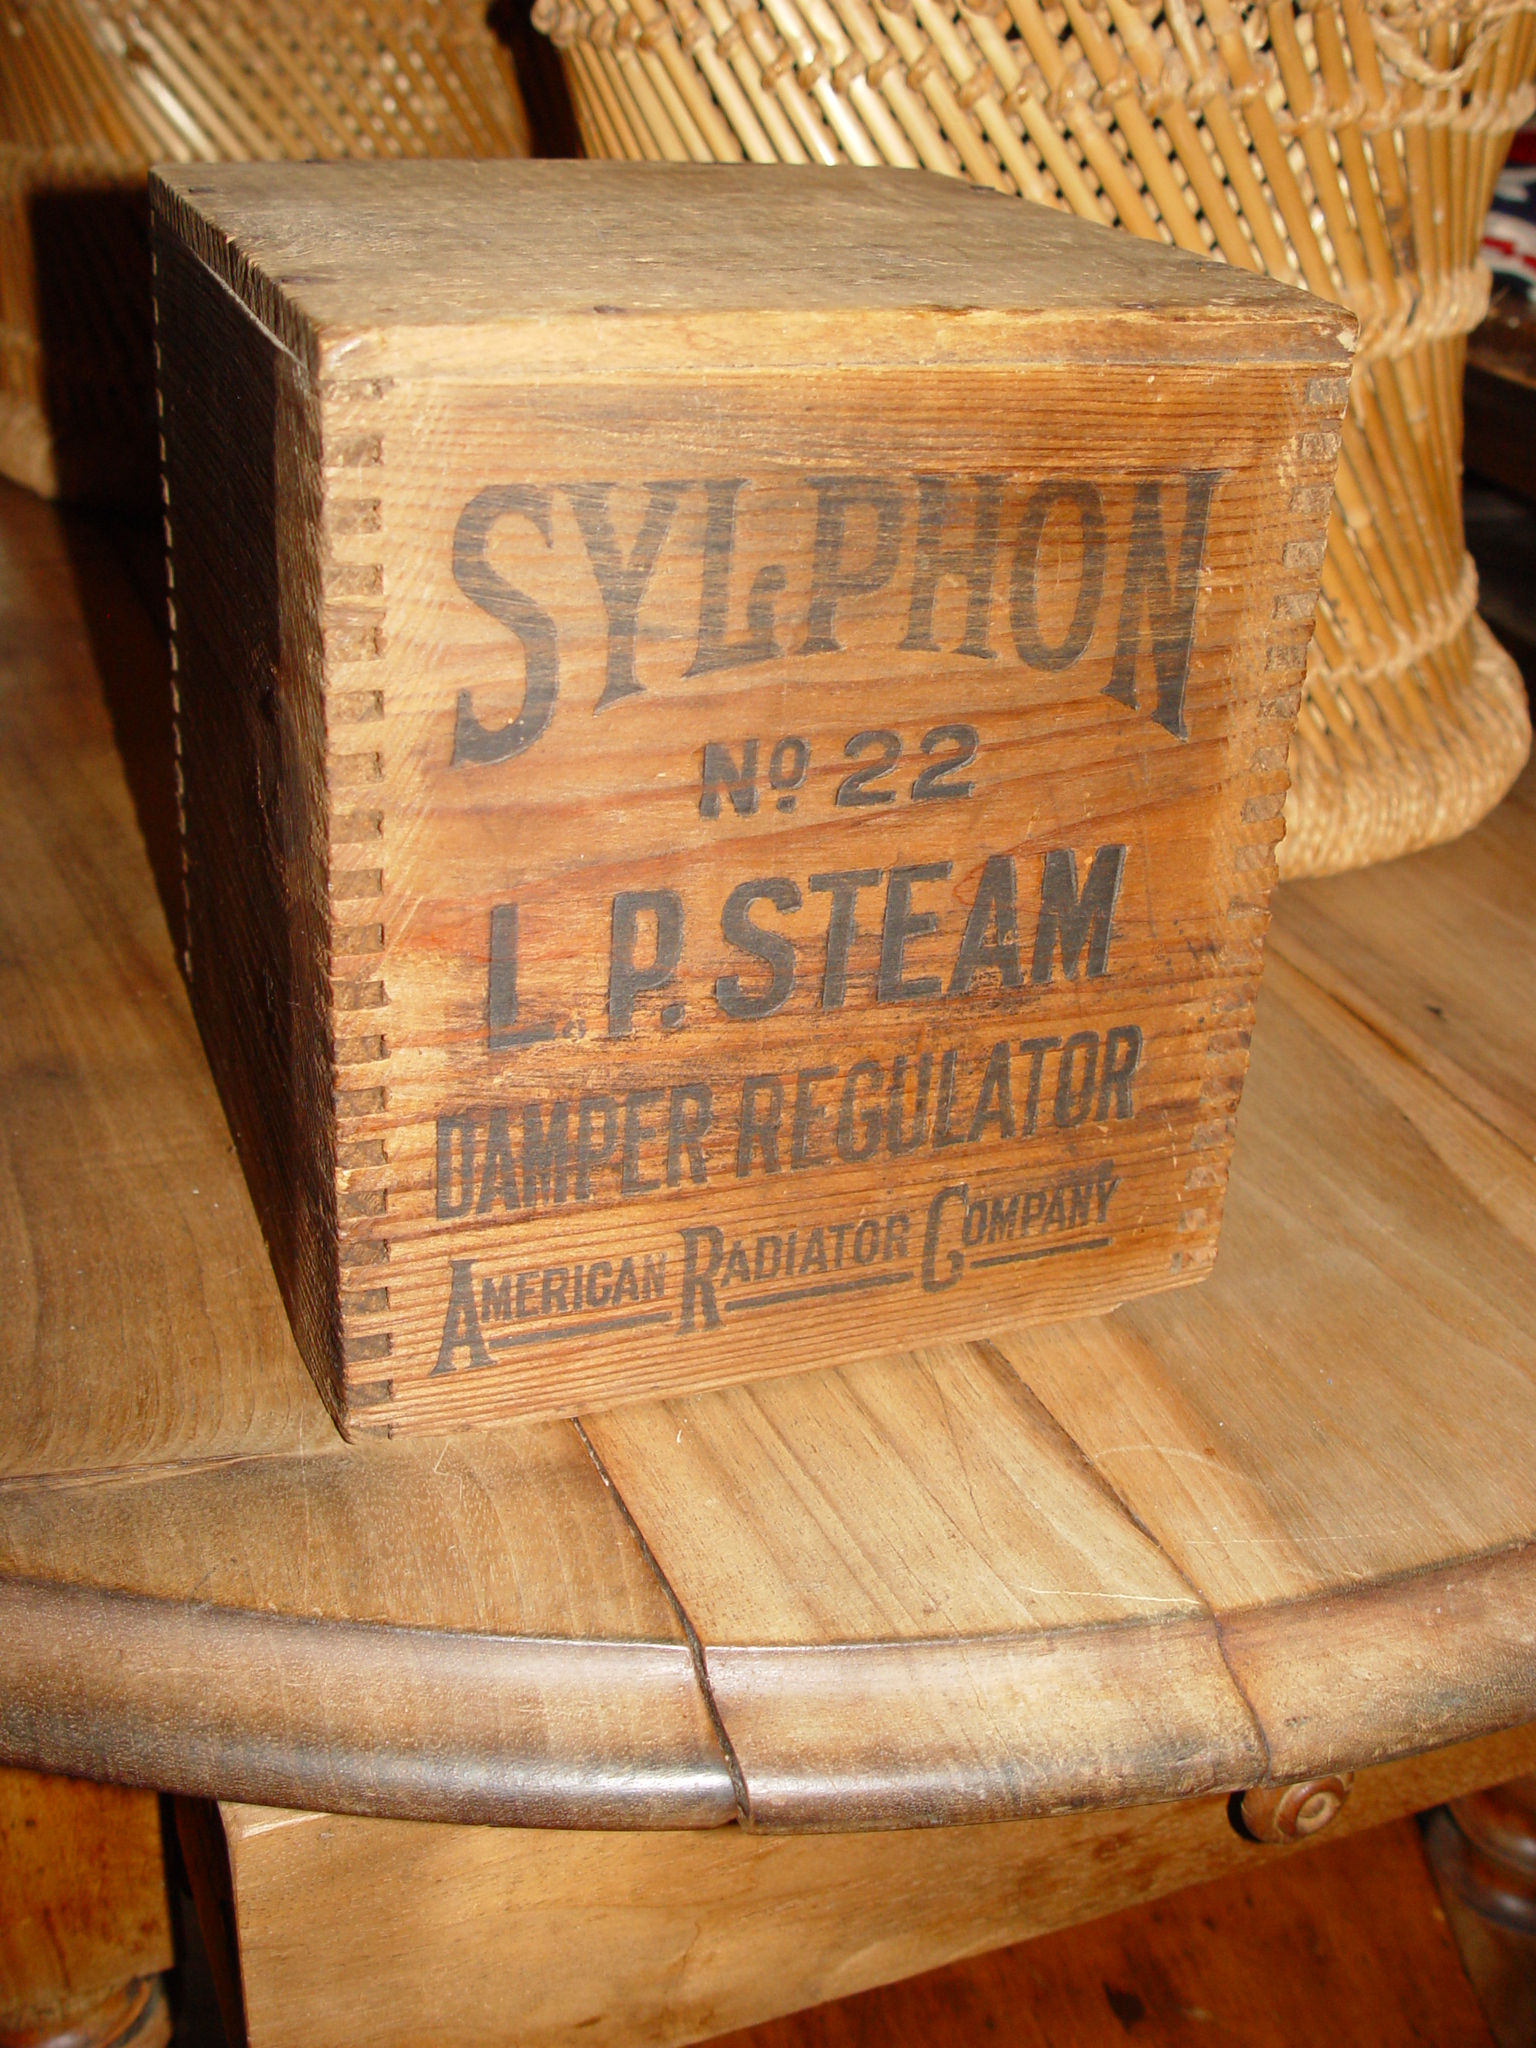 Wooden
                        Primitive Advertising Crate American Radiator
                        Co. L.P. Steam